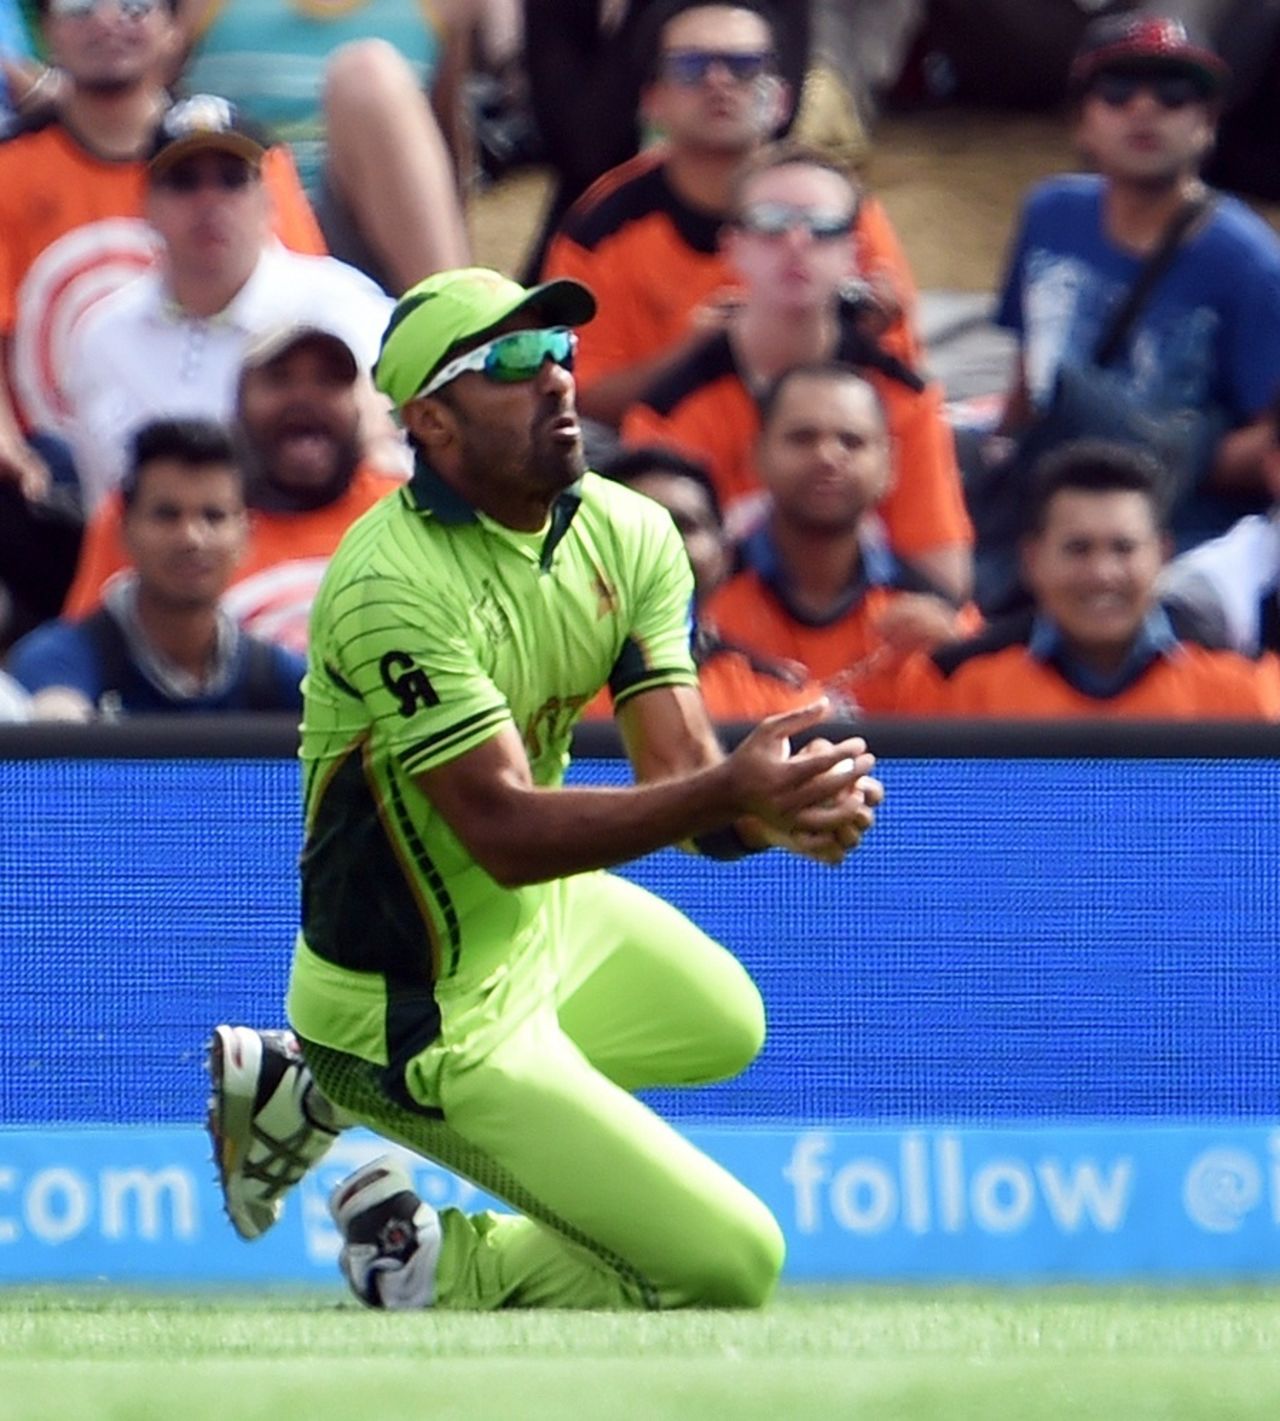 Wahab Riaz slides to pouch Chris Gayle, Pakistan v West Indies, World Cup 2015, Group B, Christchurch, February 21, 2015